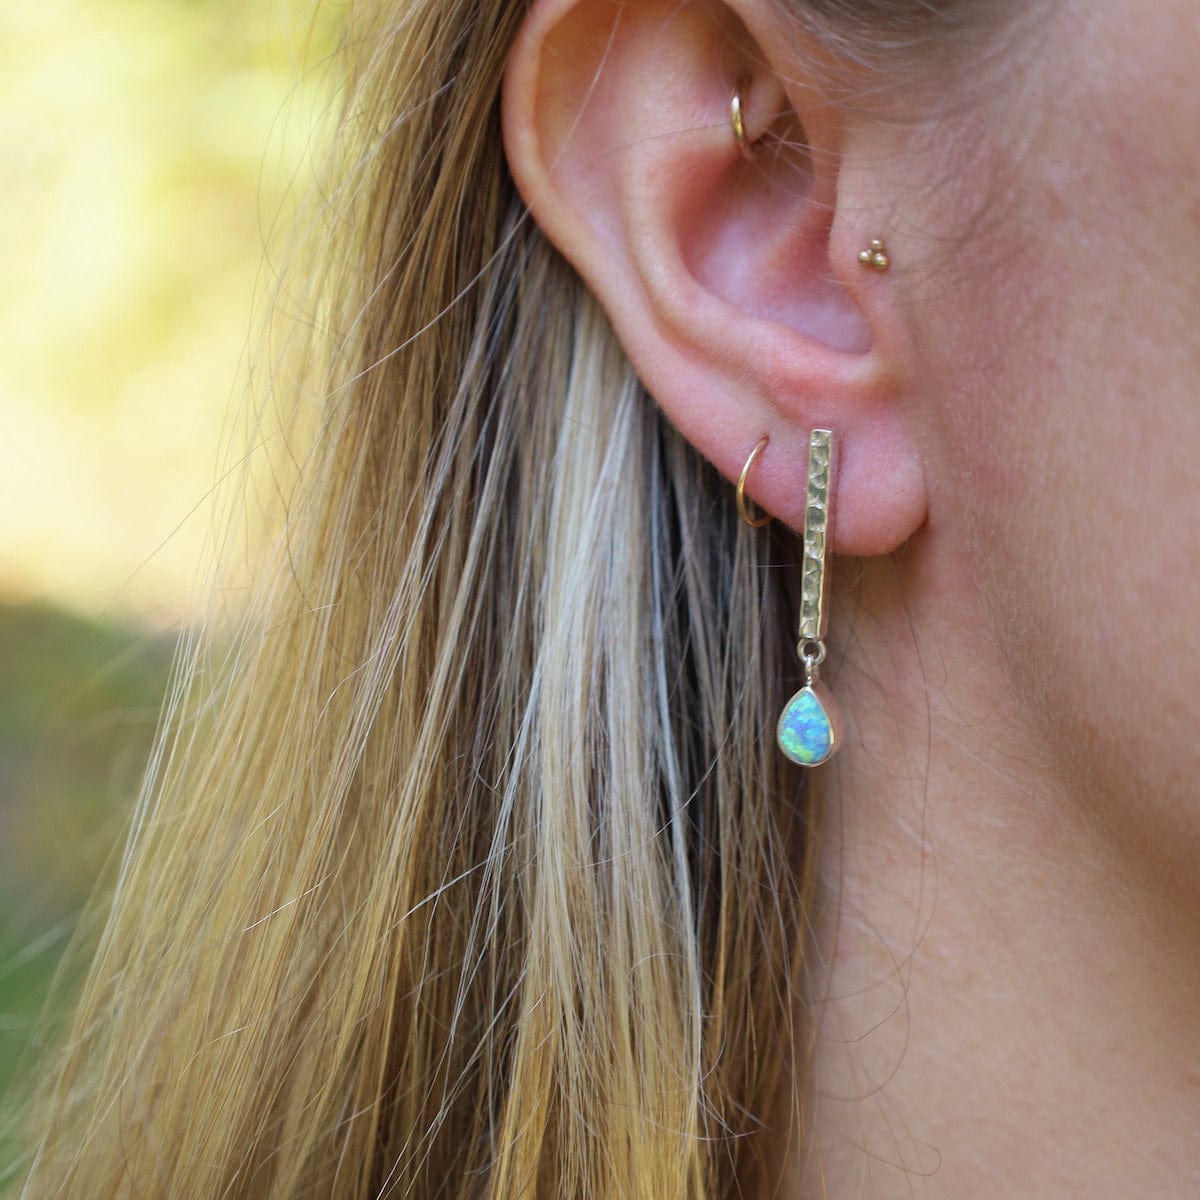 EAR Hammered Sterling Bar Earrings with Opal Drop